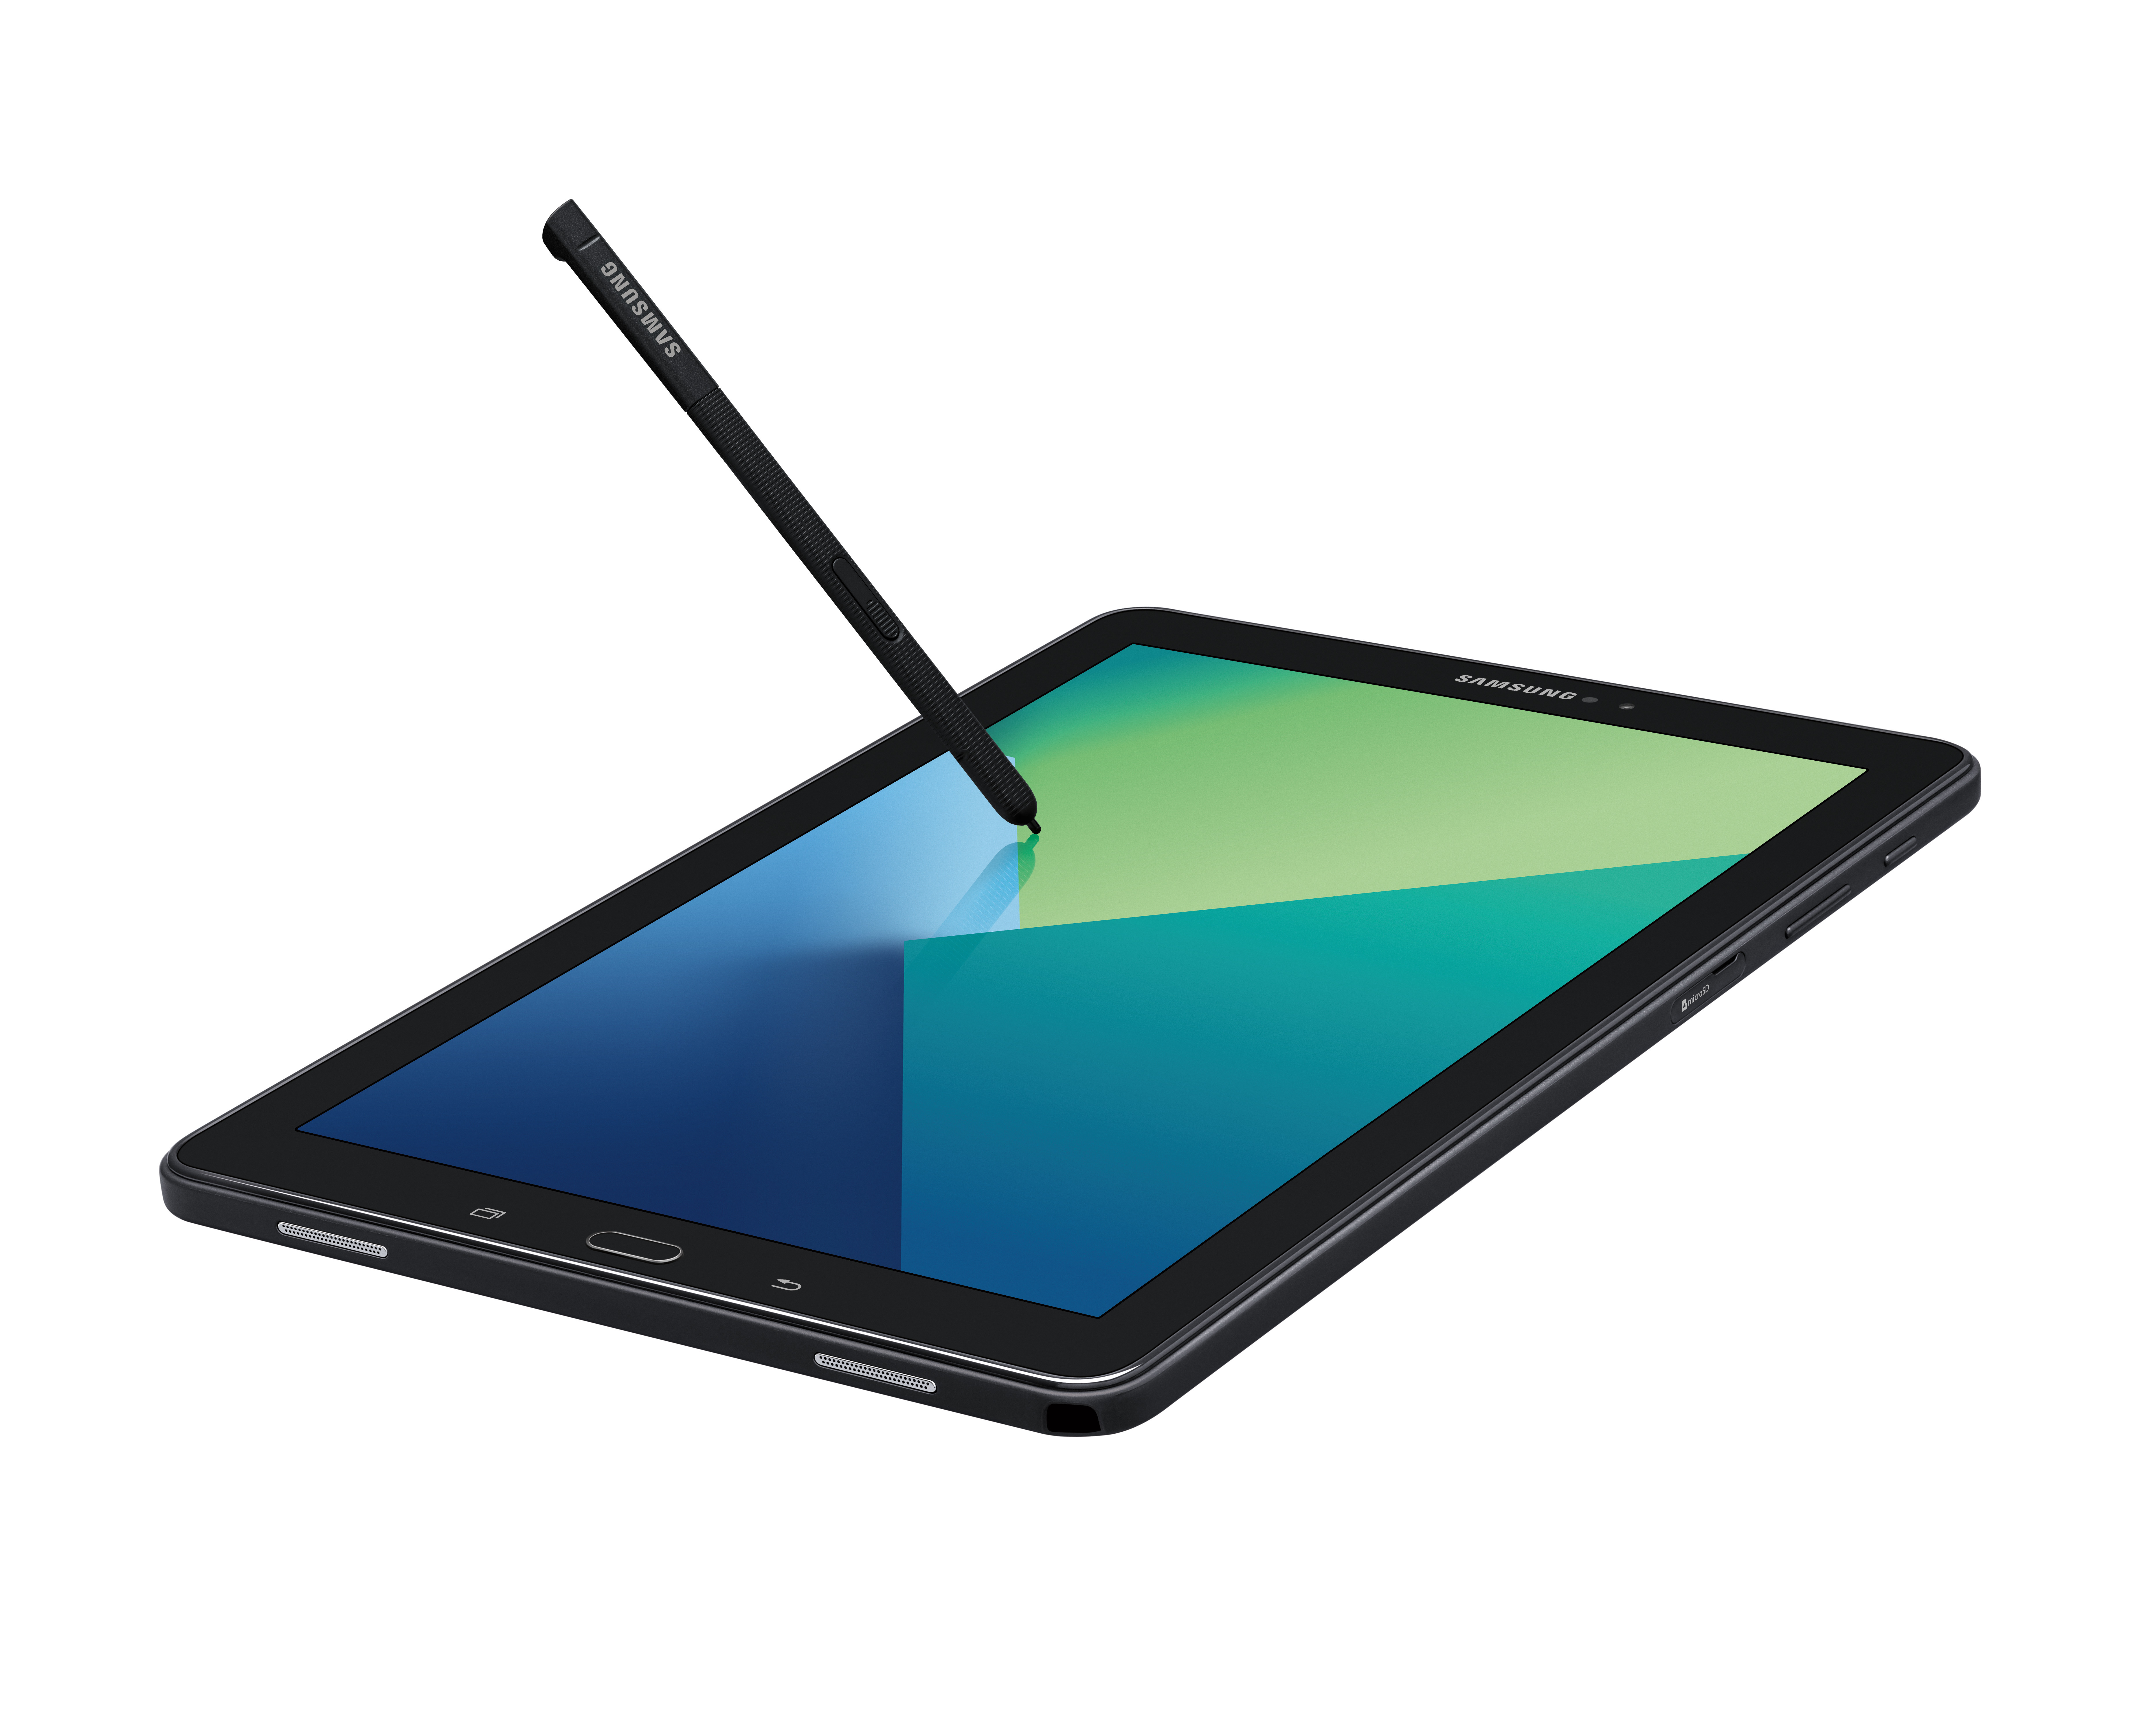 Samsung Galaxy Tab A 10.1” with S Pen Makes US Debut